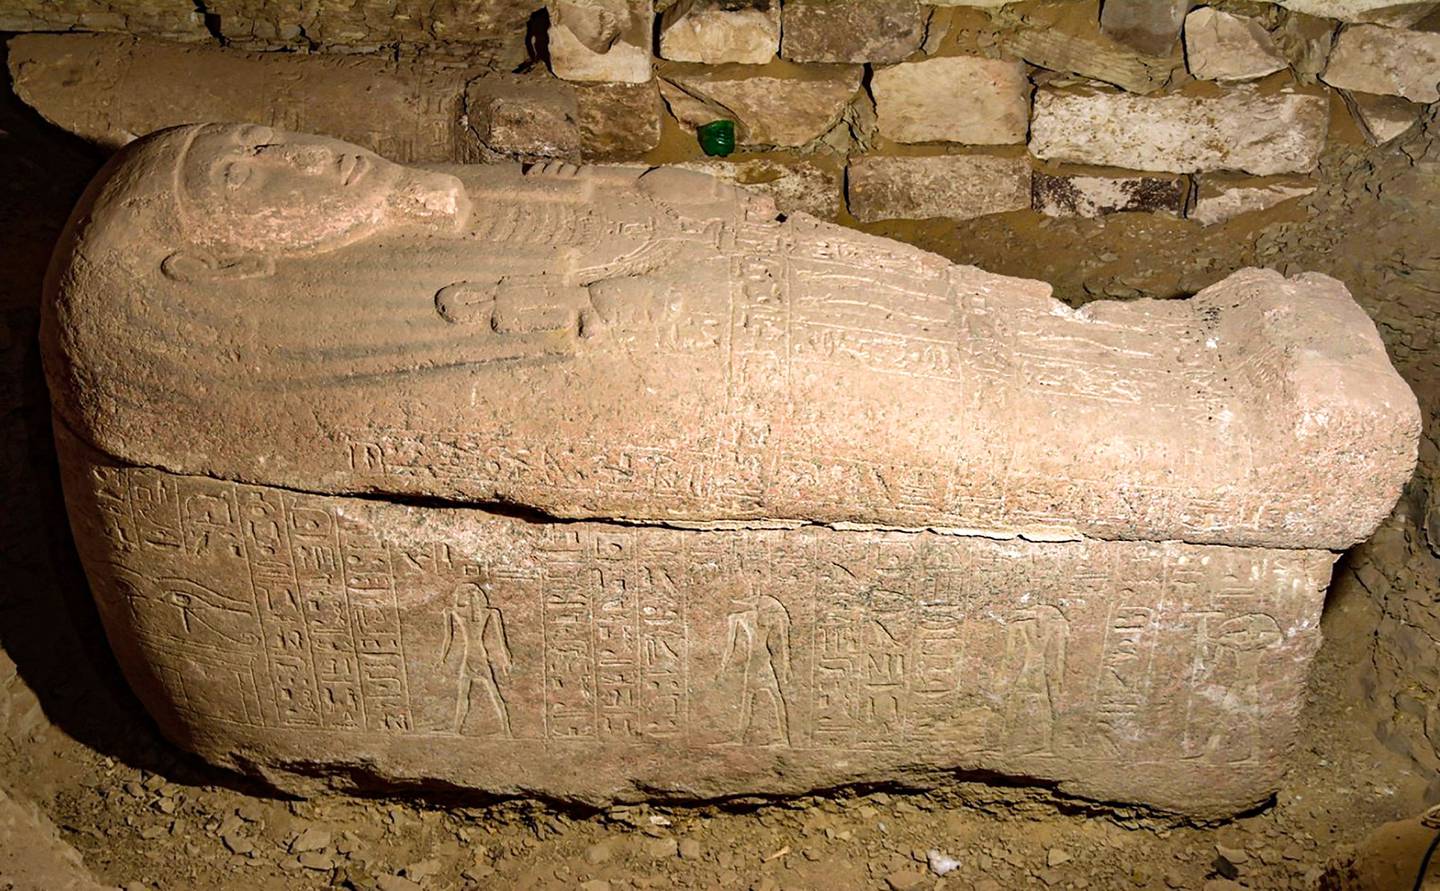 A piece near the top of the coffin had been smashed off, indicating it had been robbed in the past. Photo: Egyptian Ministry of Antiquities/AFP